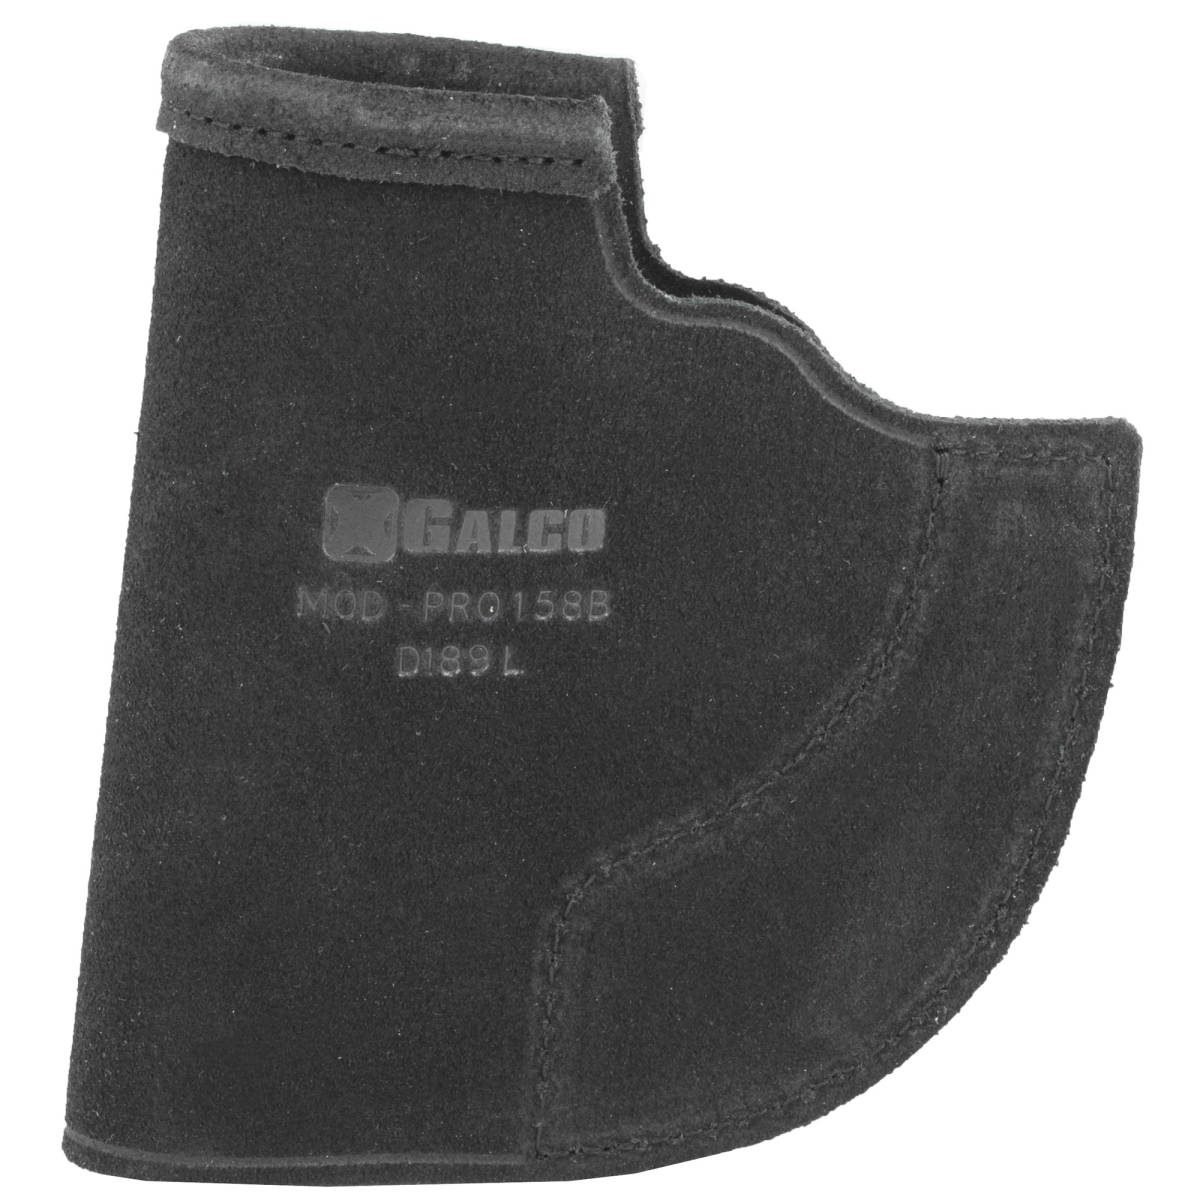 Galco PRO158B Pocket Protector Black Leather Fits Charter Arms...-img-1